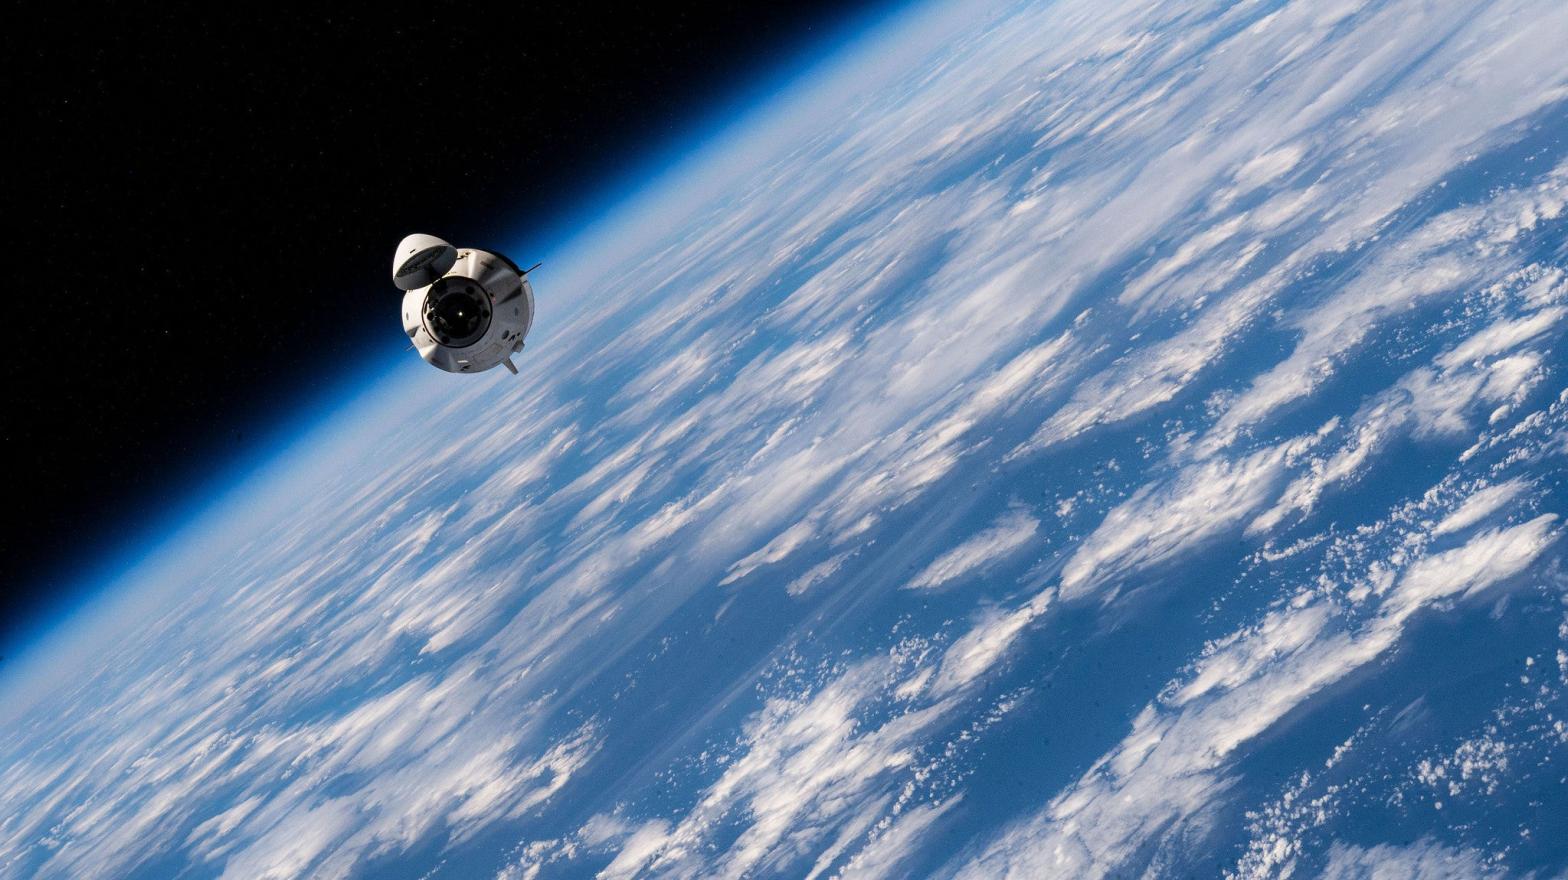 A SpaceX Crew Dragon during the Crew-2 mission in November 2021. (Photo: SpaceX)